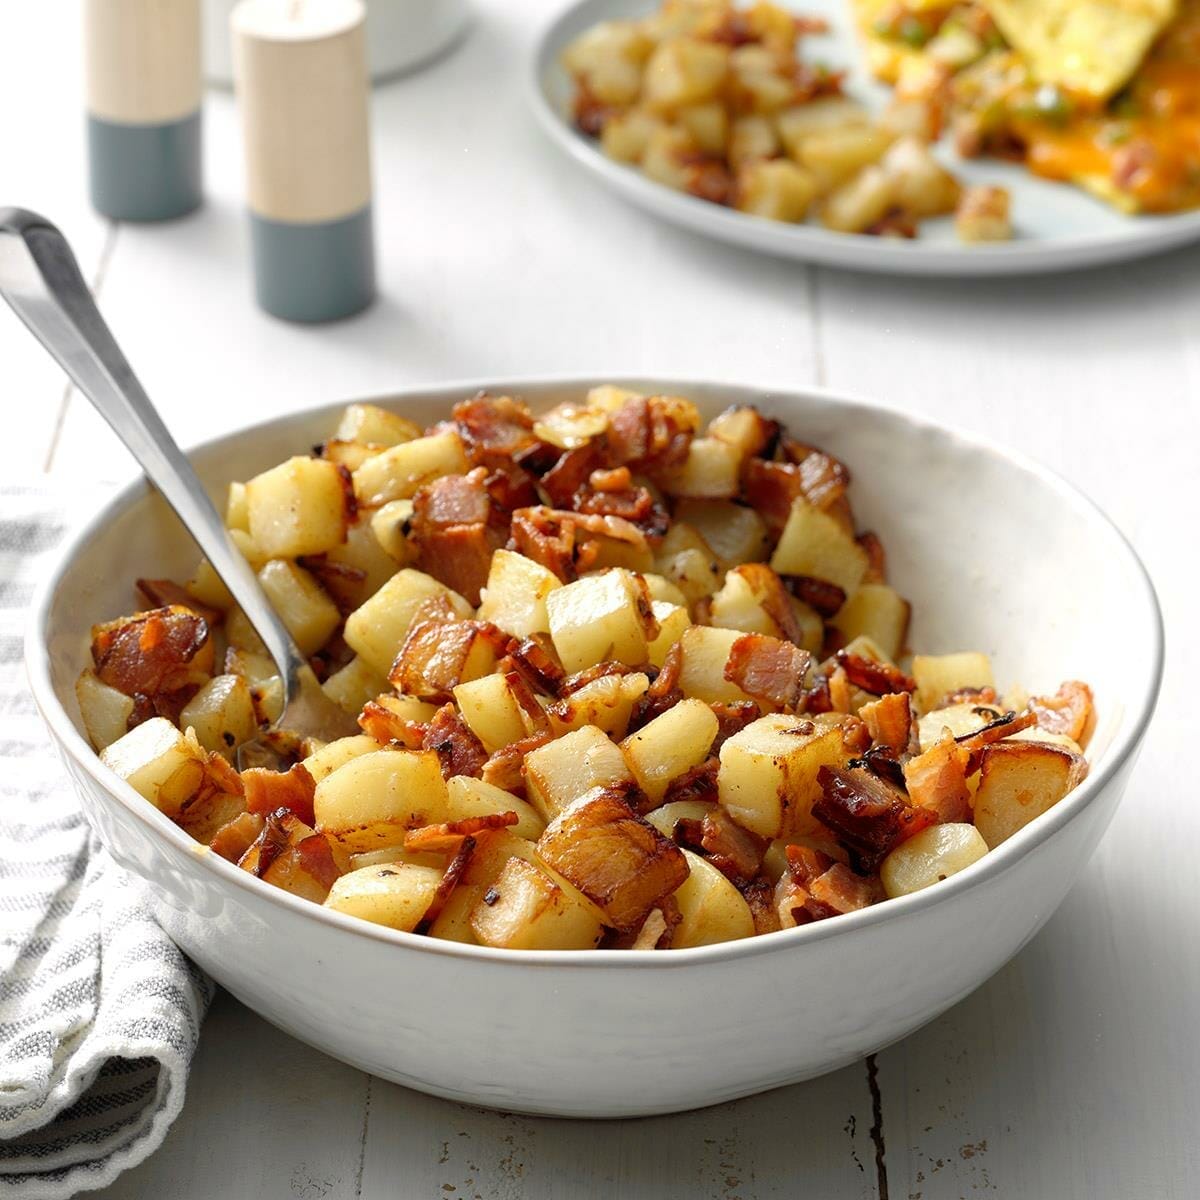 Home Fries Recipe: How to Make It